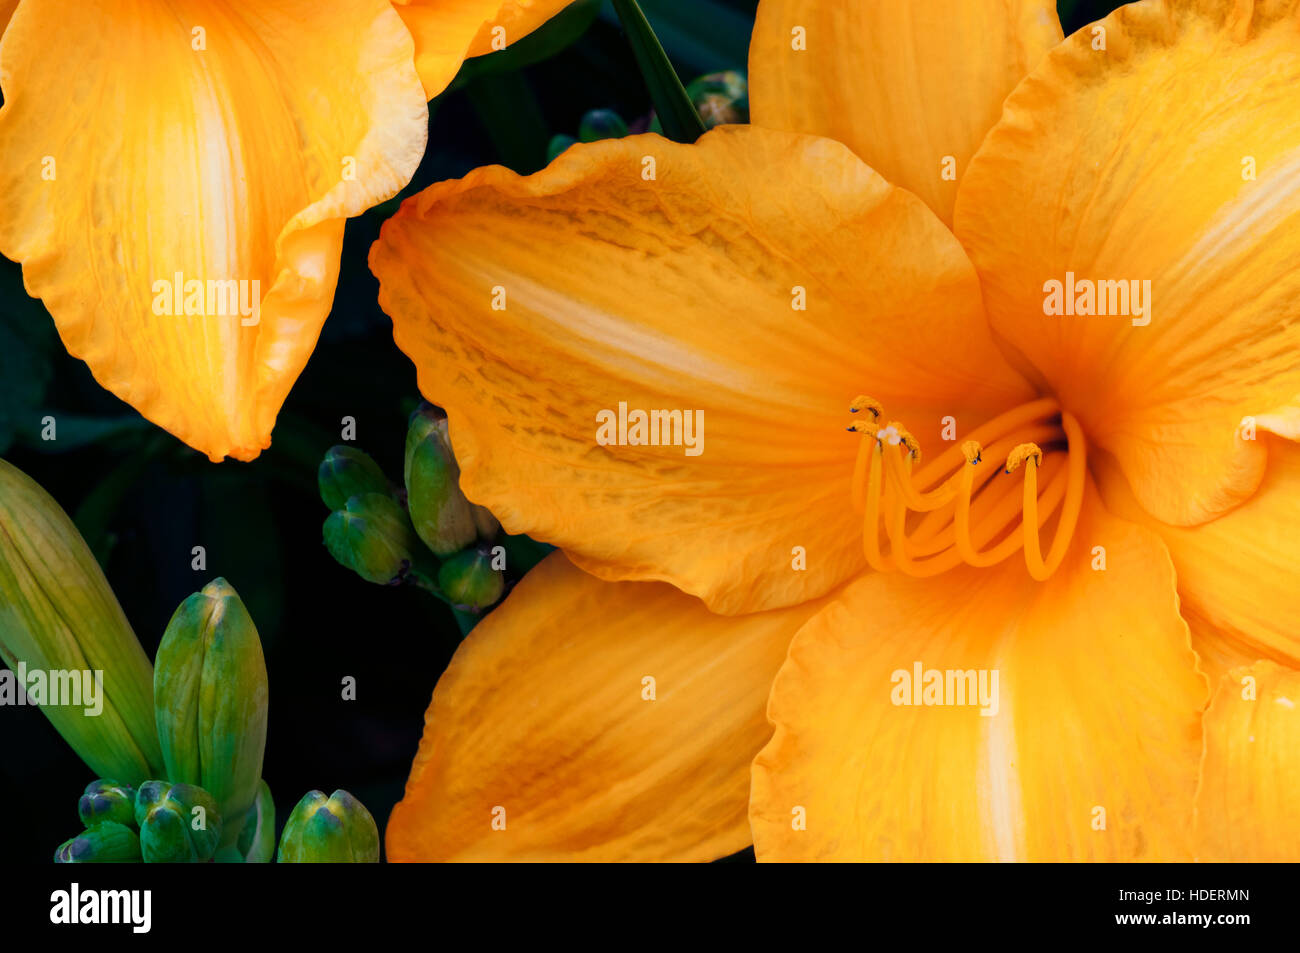 Orange lily in full bloom decorative gardening exotic tropical flower Stock Photo